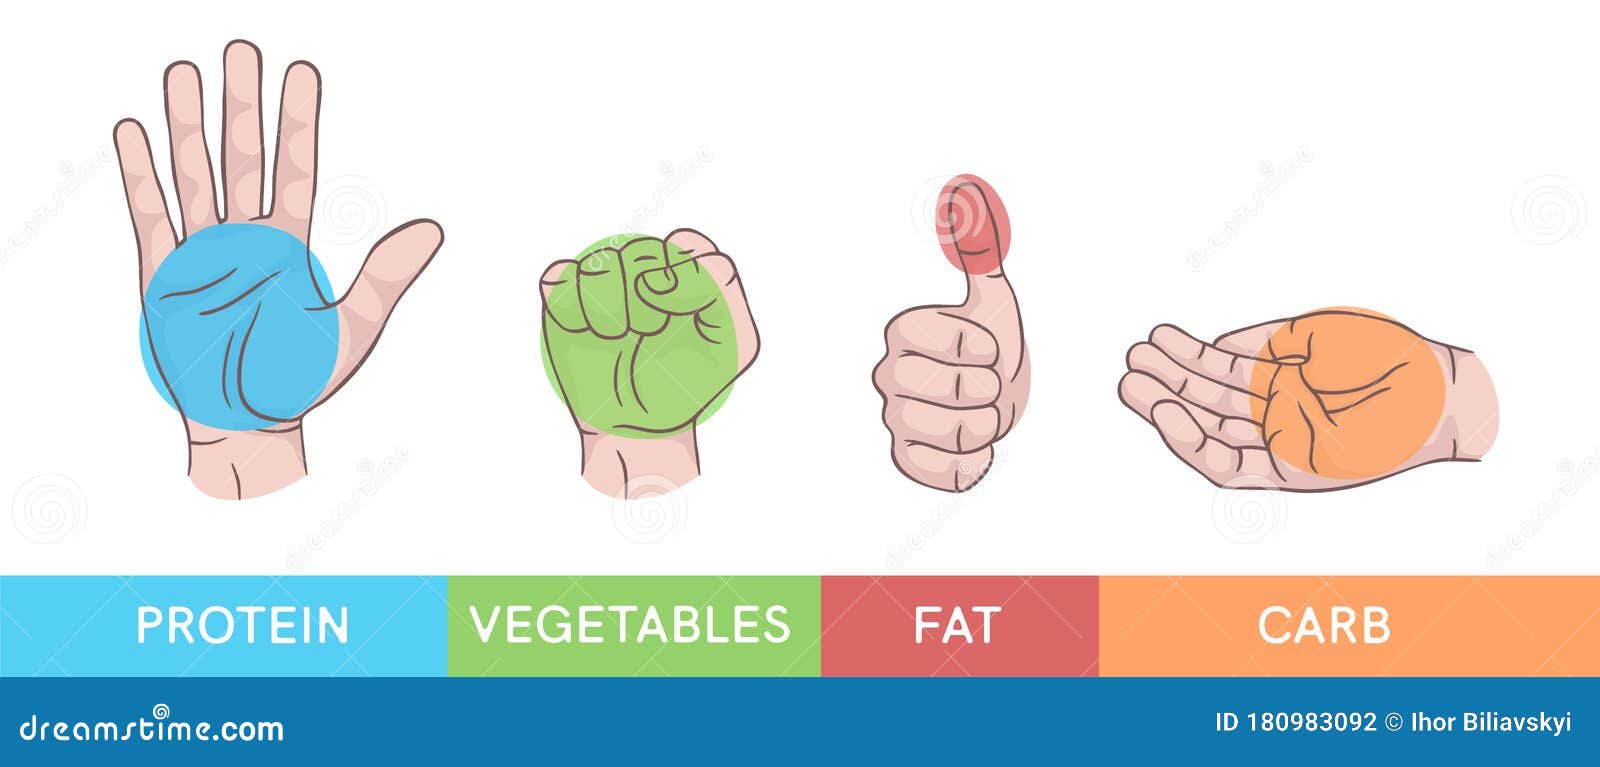 hand gestures set . palm, fist, thumb up, cupped hand. portions of food. infographic. modern beautiful style. realistic.